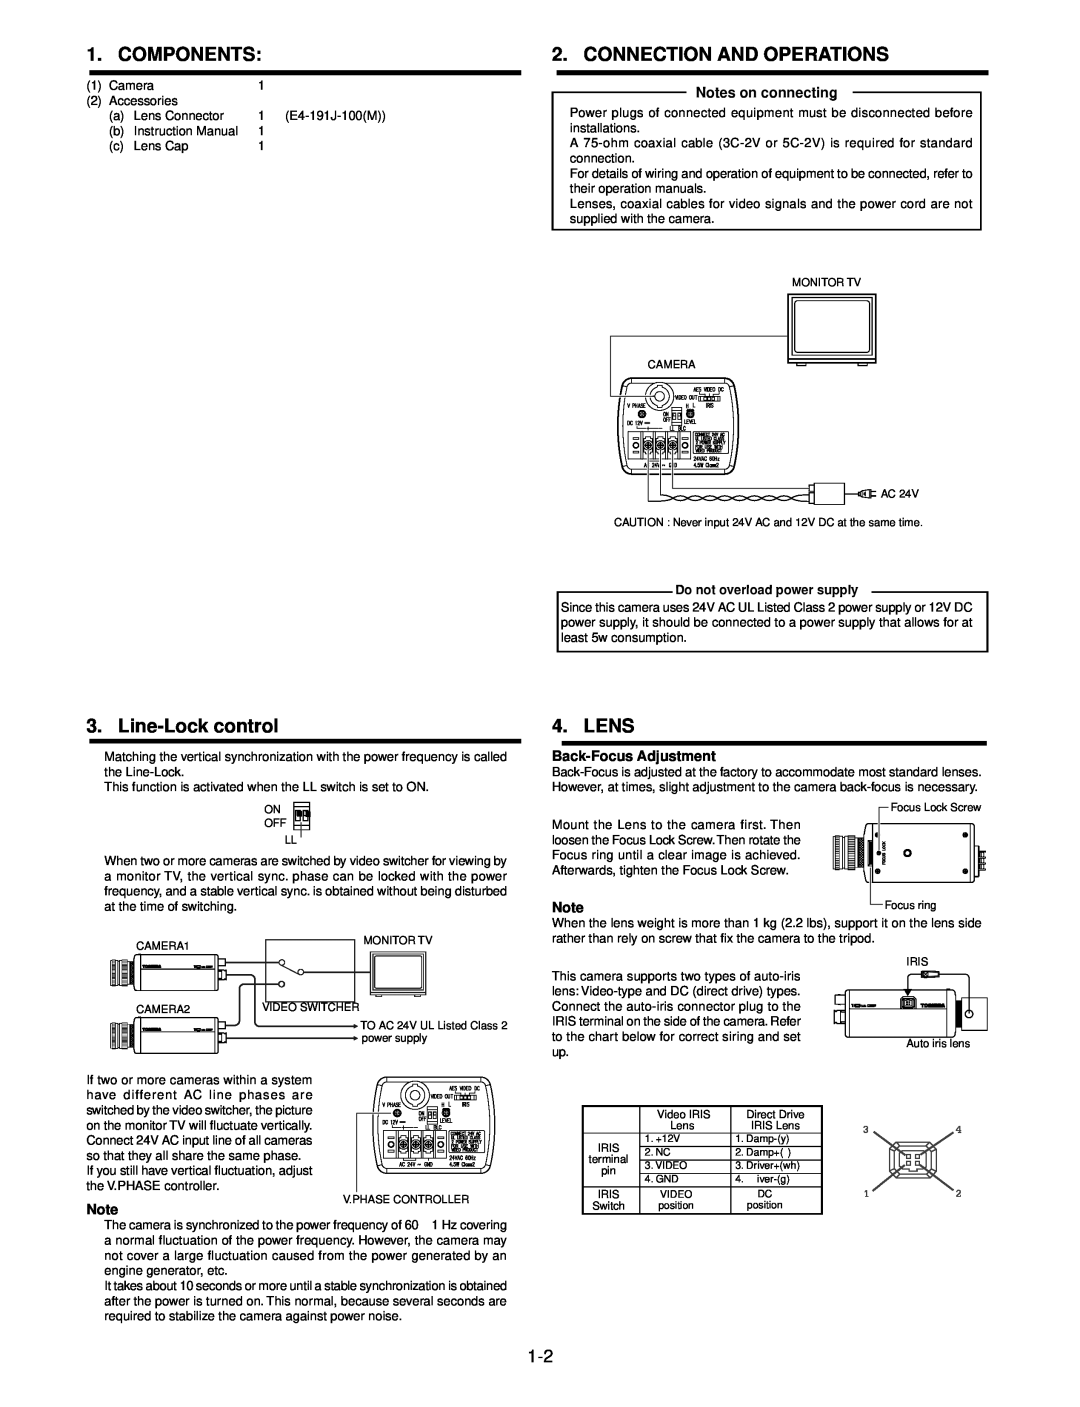 Toshiba IK-6400A Components, Connection And Operations, Line-Lockcontrol, Lens, Notes on connecting, Back-FocusAdjustment 